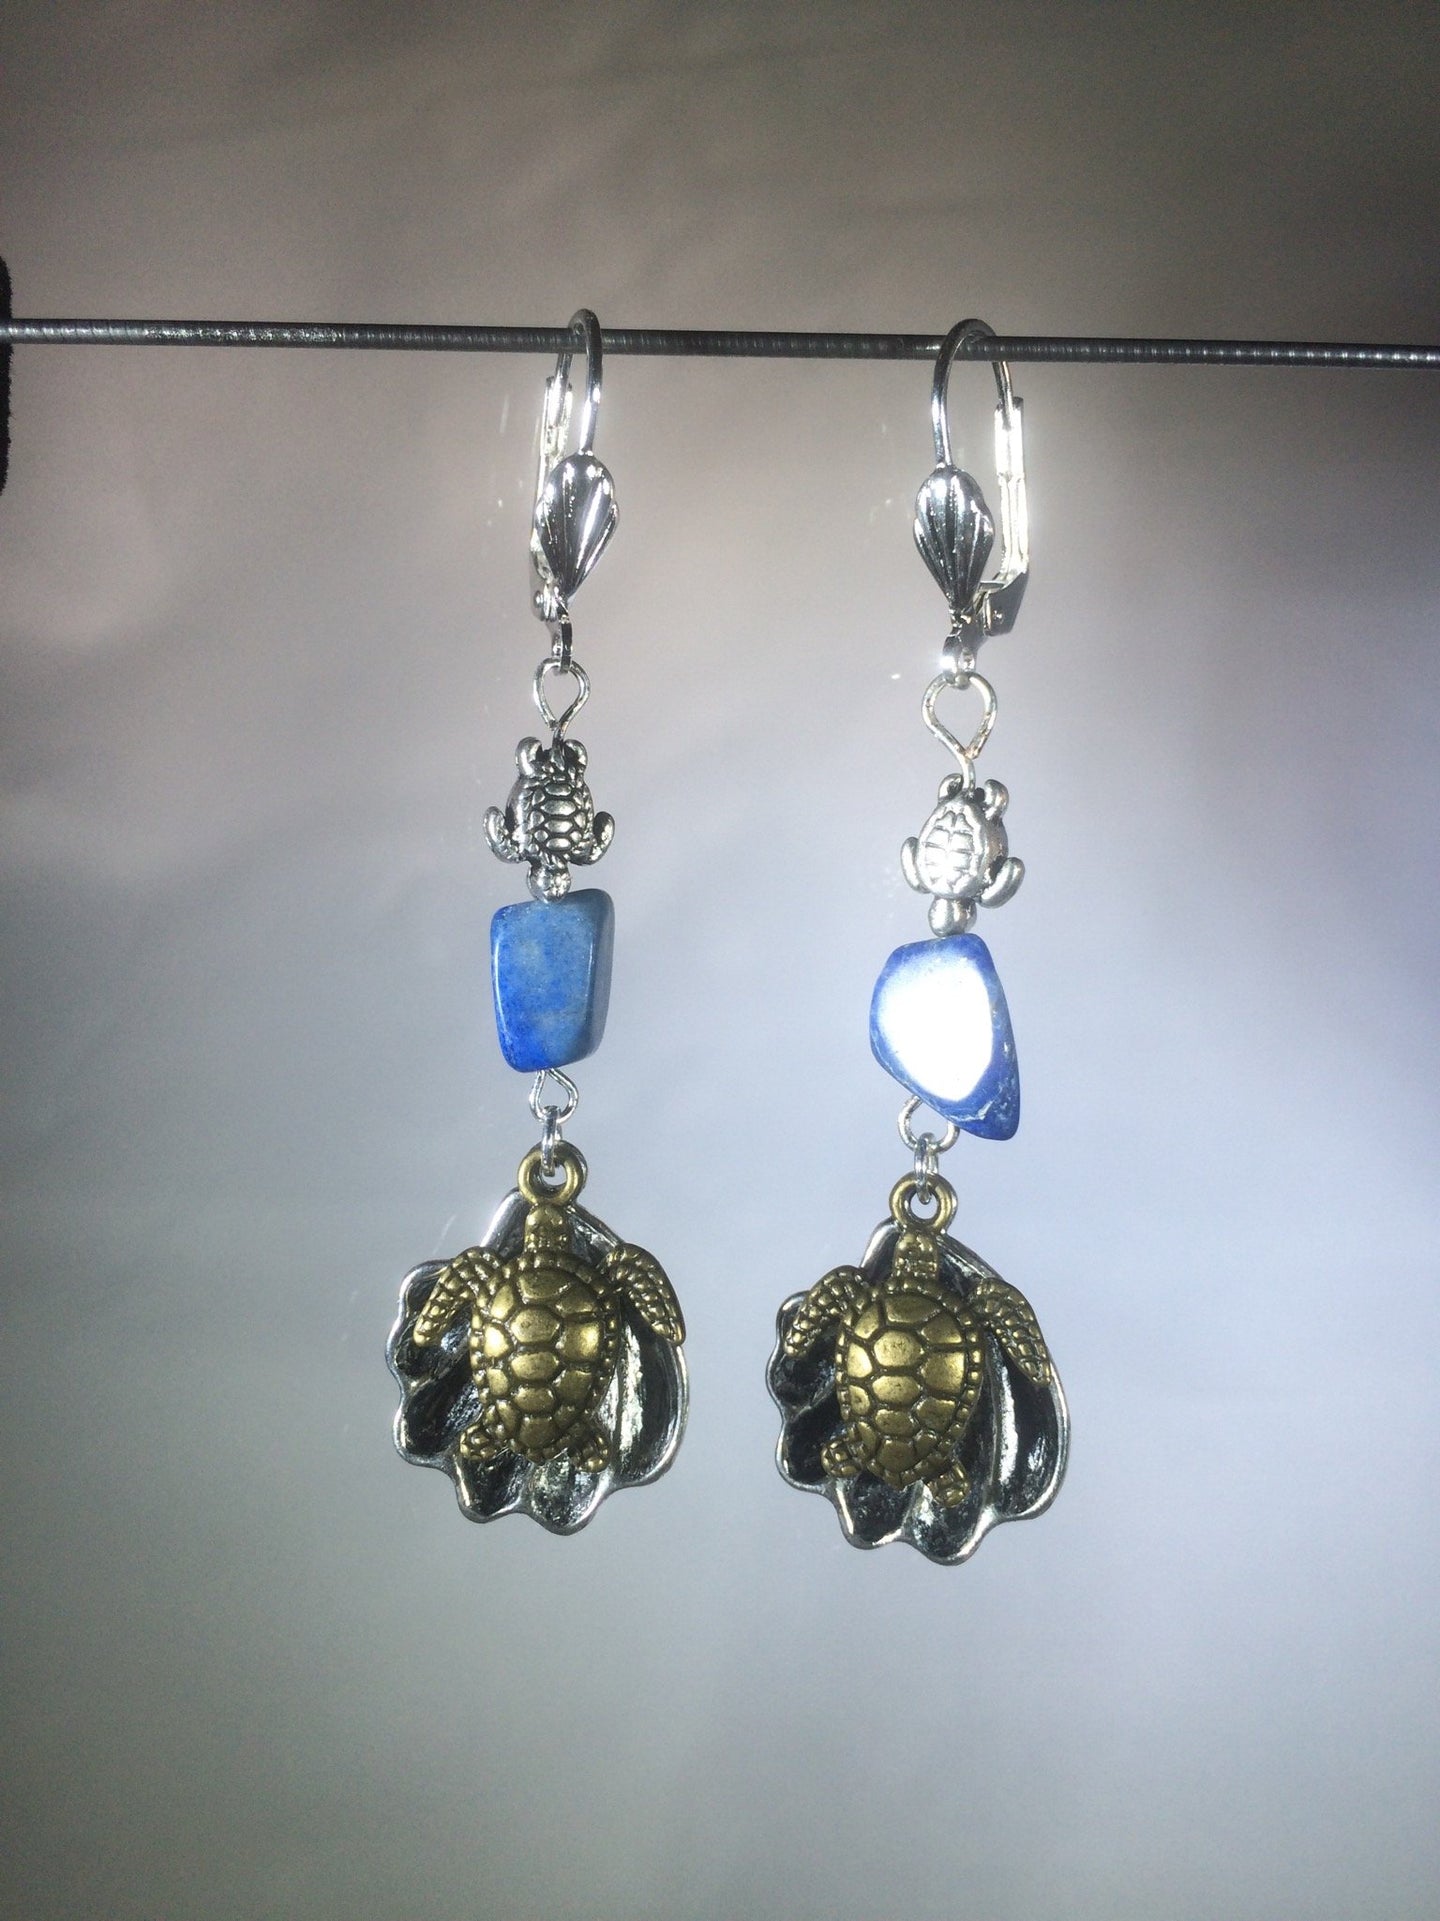 Leverback earrings made from plated metal charms and findings with an 8mm lapis lazuli bead to add a vibrant blue color.